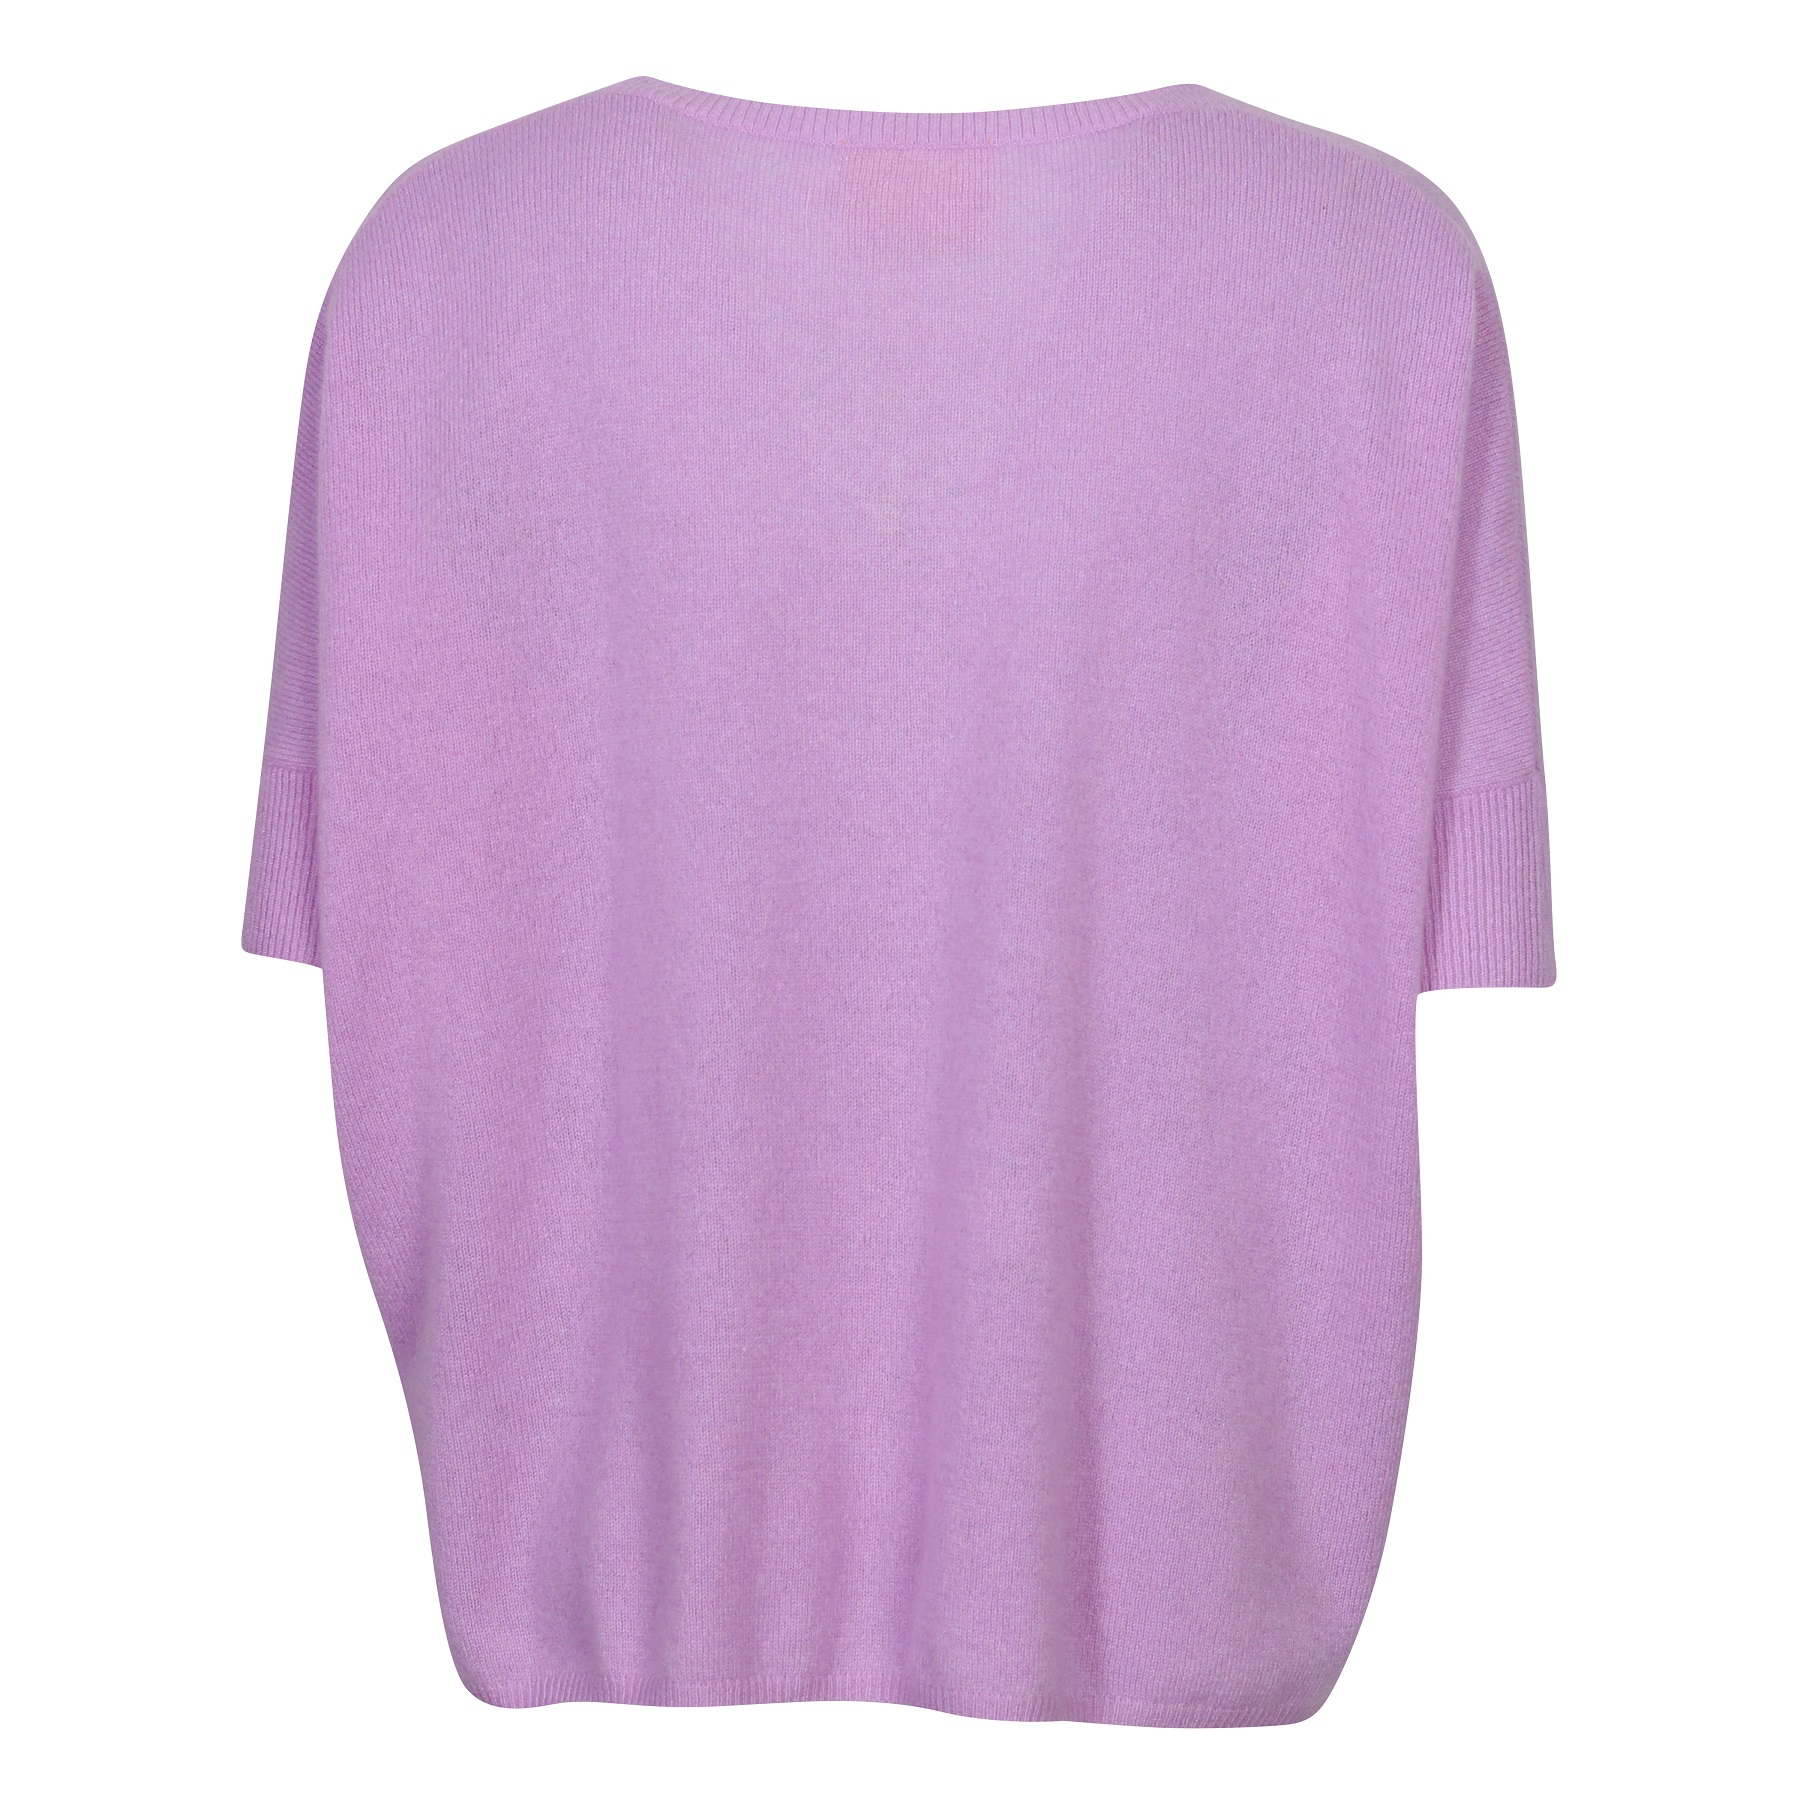 Absolut Cashmere Poncho Kate in Lilac S